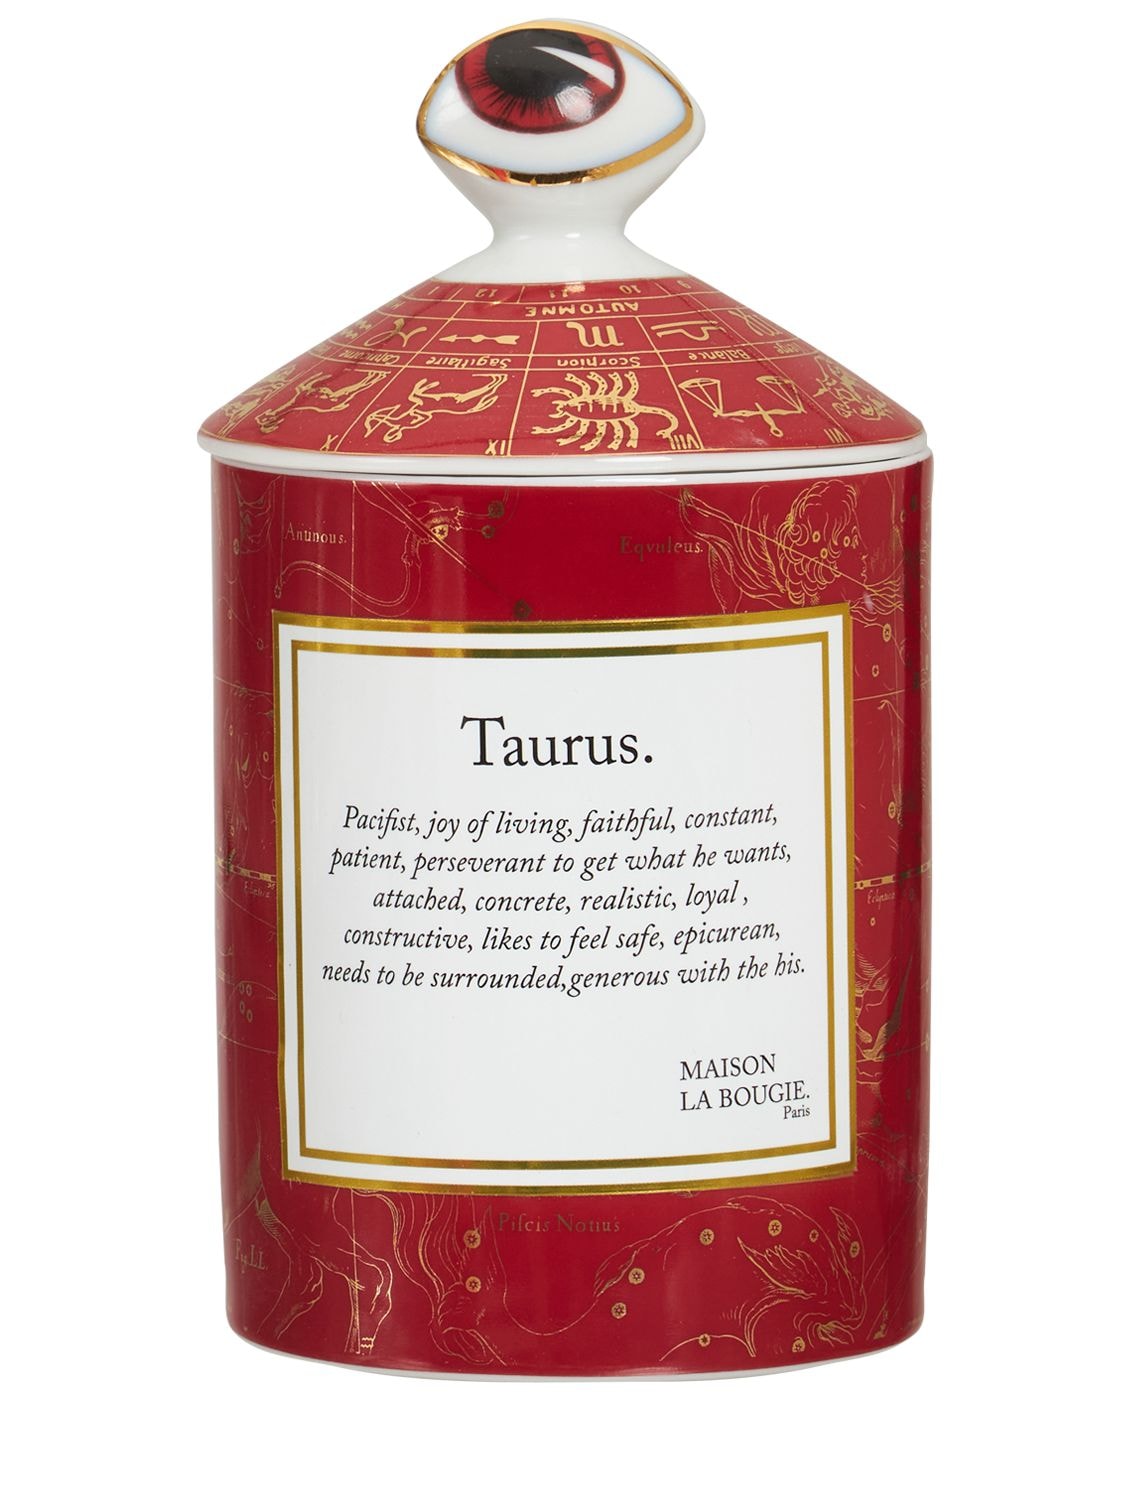 Maison La Bougie 350gr Taurus Zodiac Scented Candle In Red